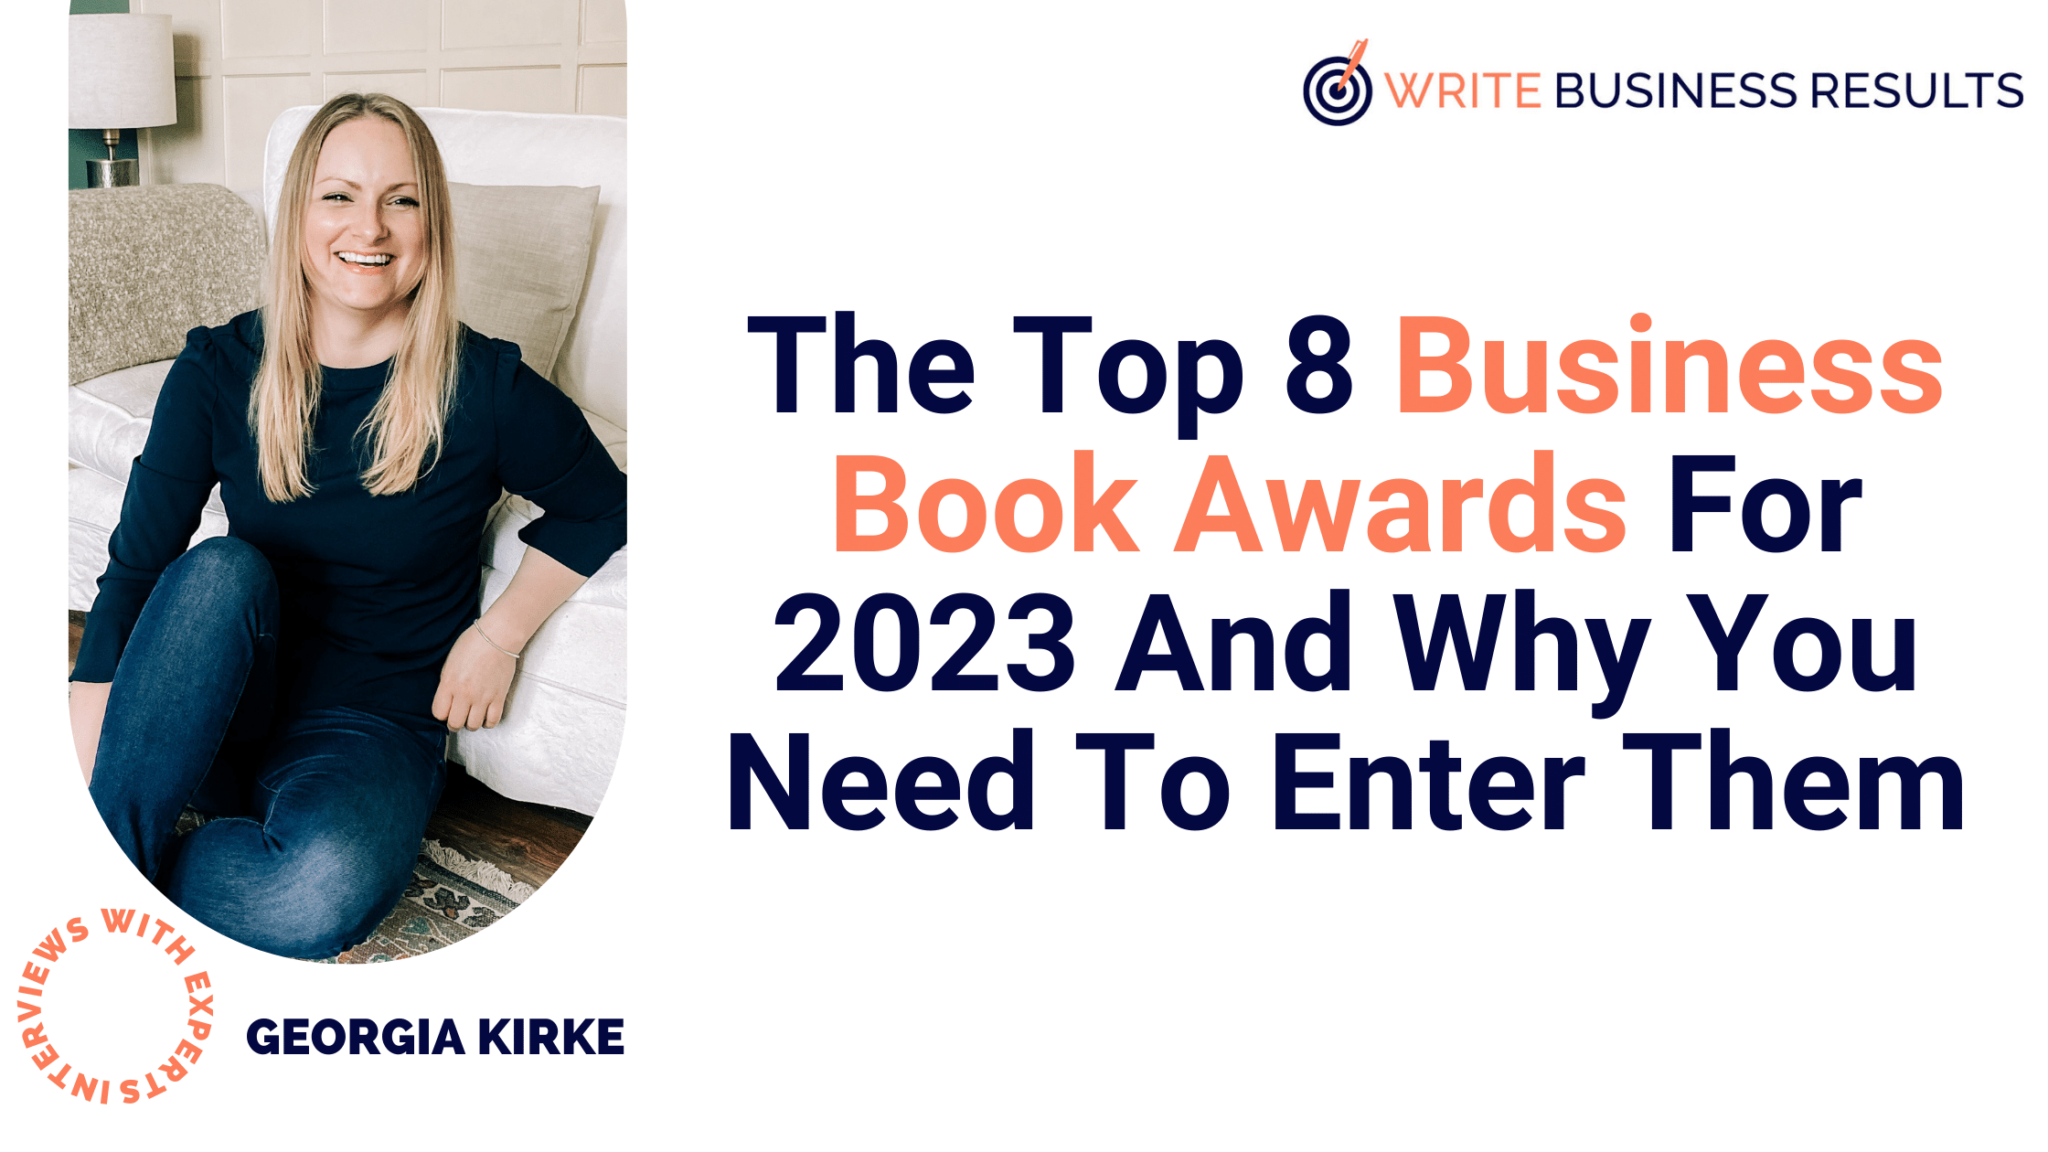 The Top 8 Business Book Awards For 2023 And Why You Need To Enter Them